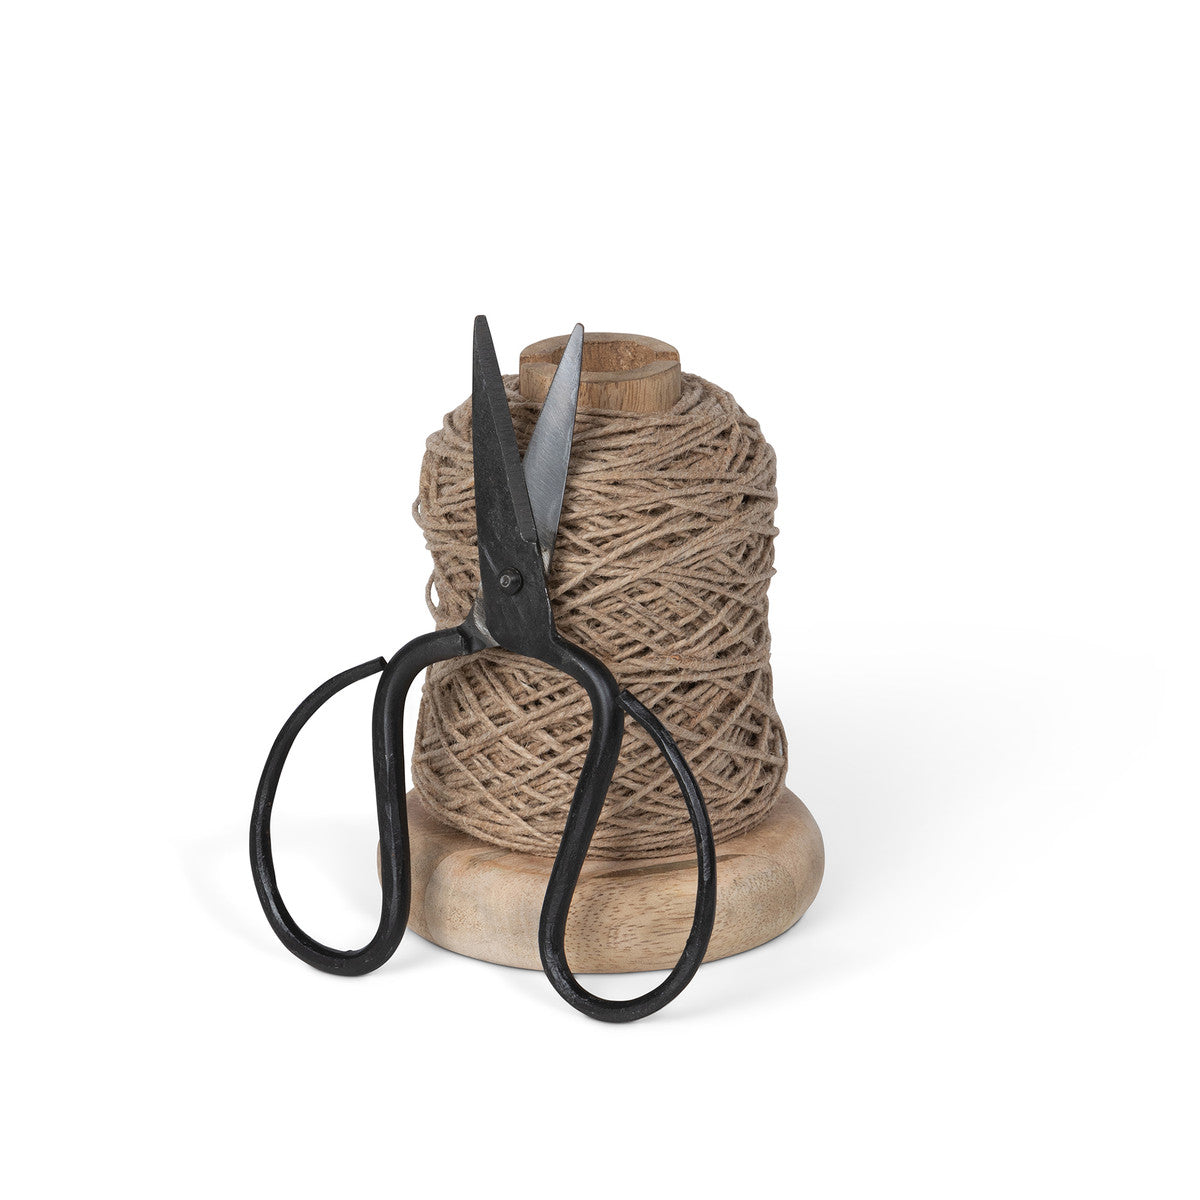 wood spool of jute with black scissors proped on front with white background